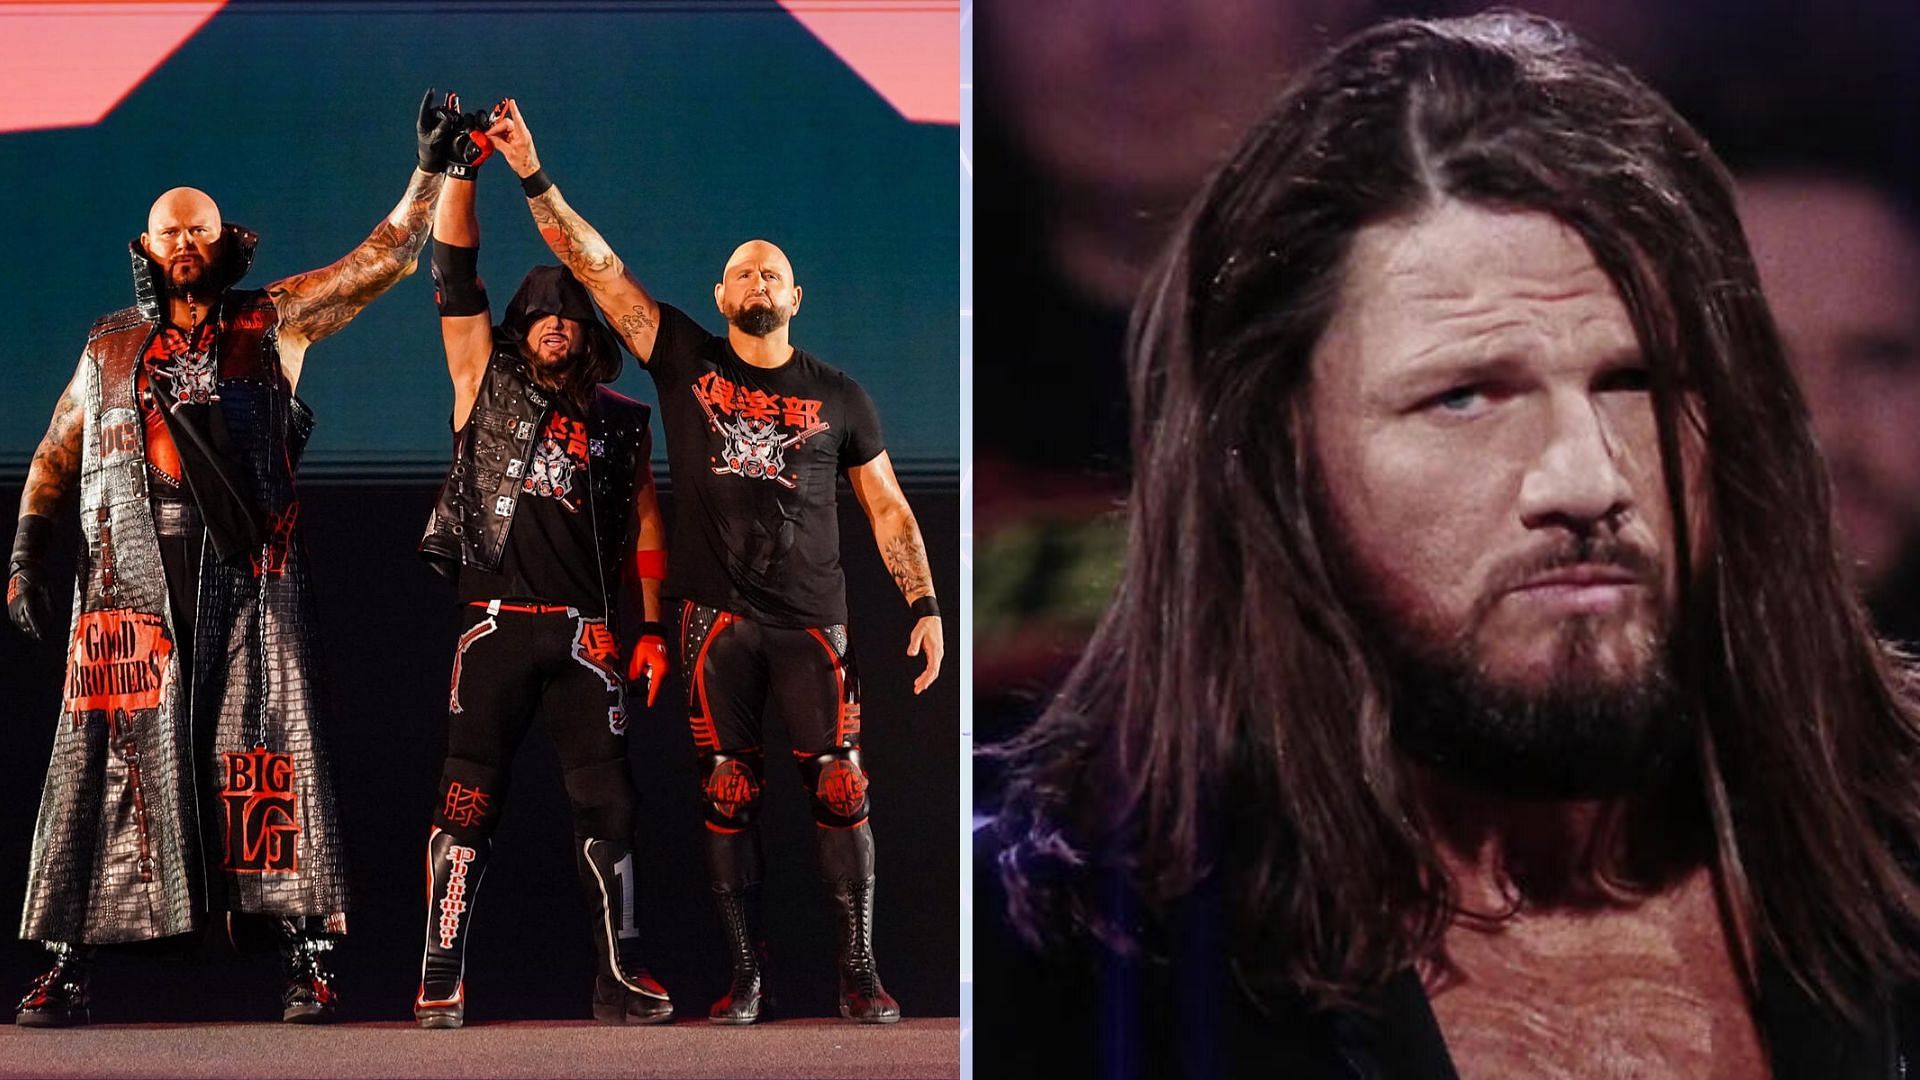 The O.C. and AJ Styles are at odds on WWE SmackDown